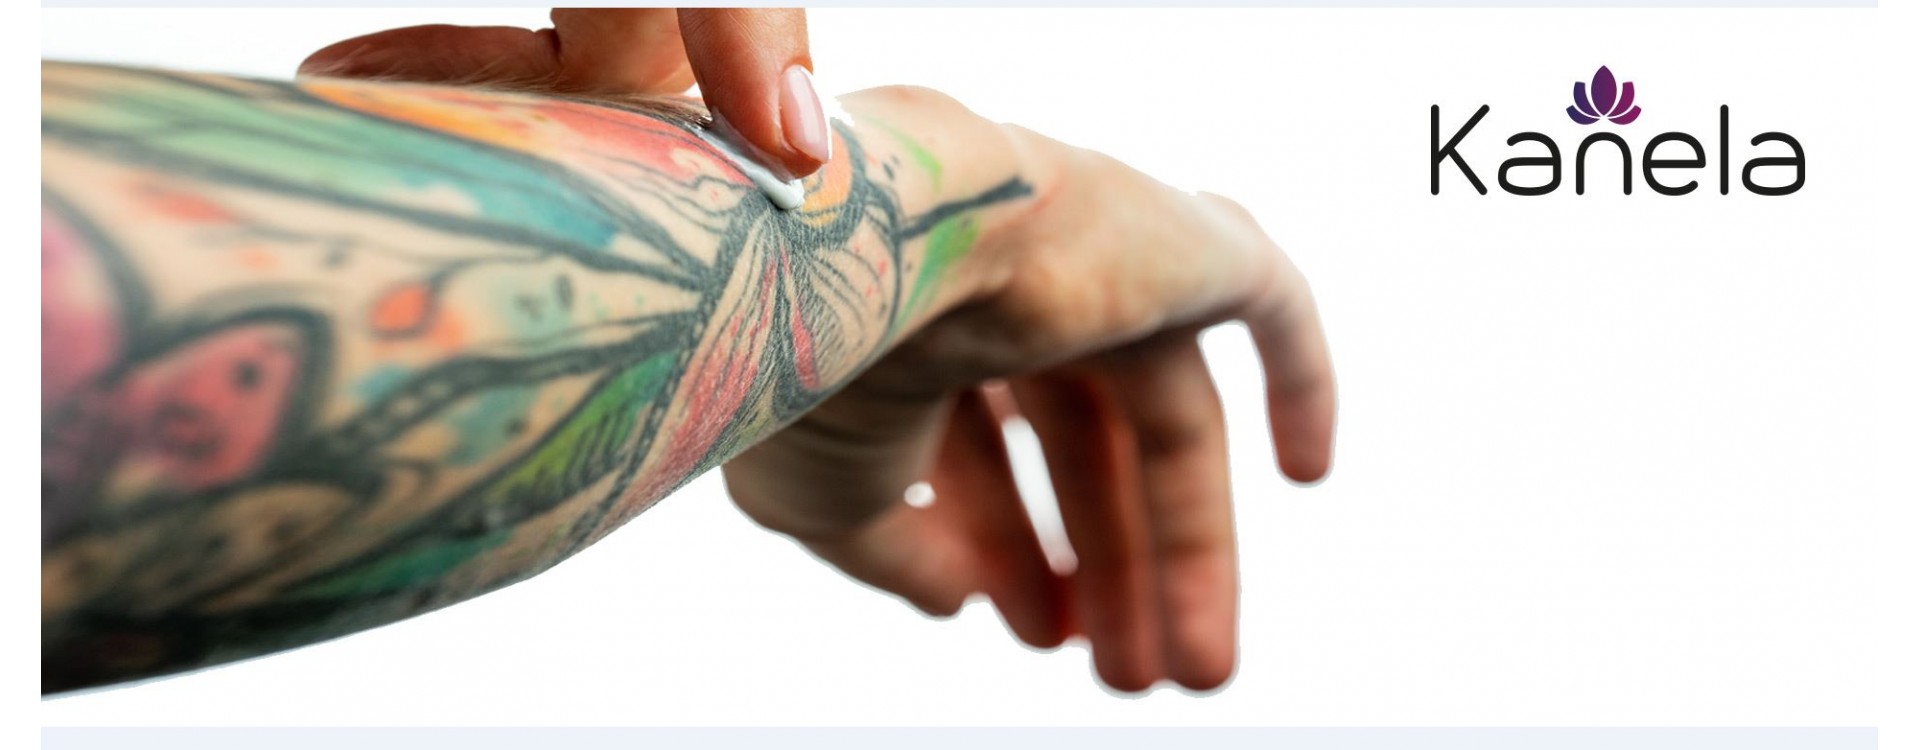 New tattoo? See how you can take care of the skin after a tattoo | Kanela